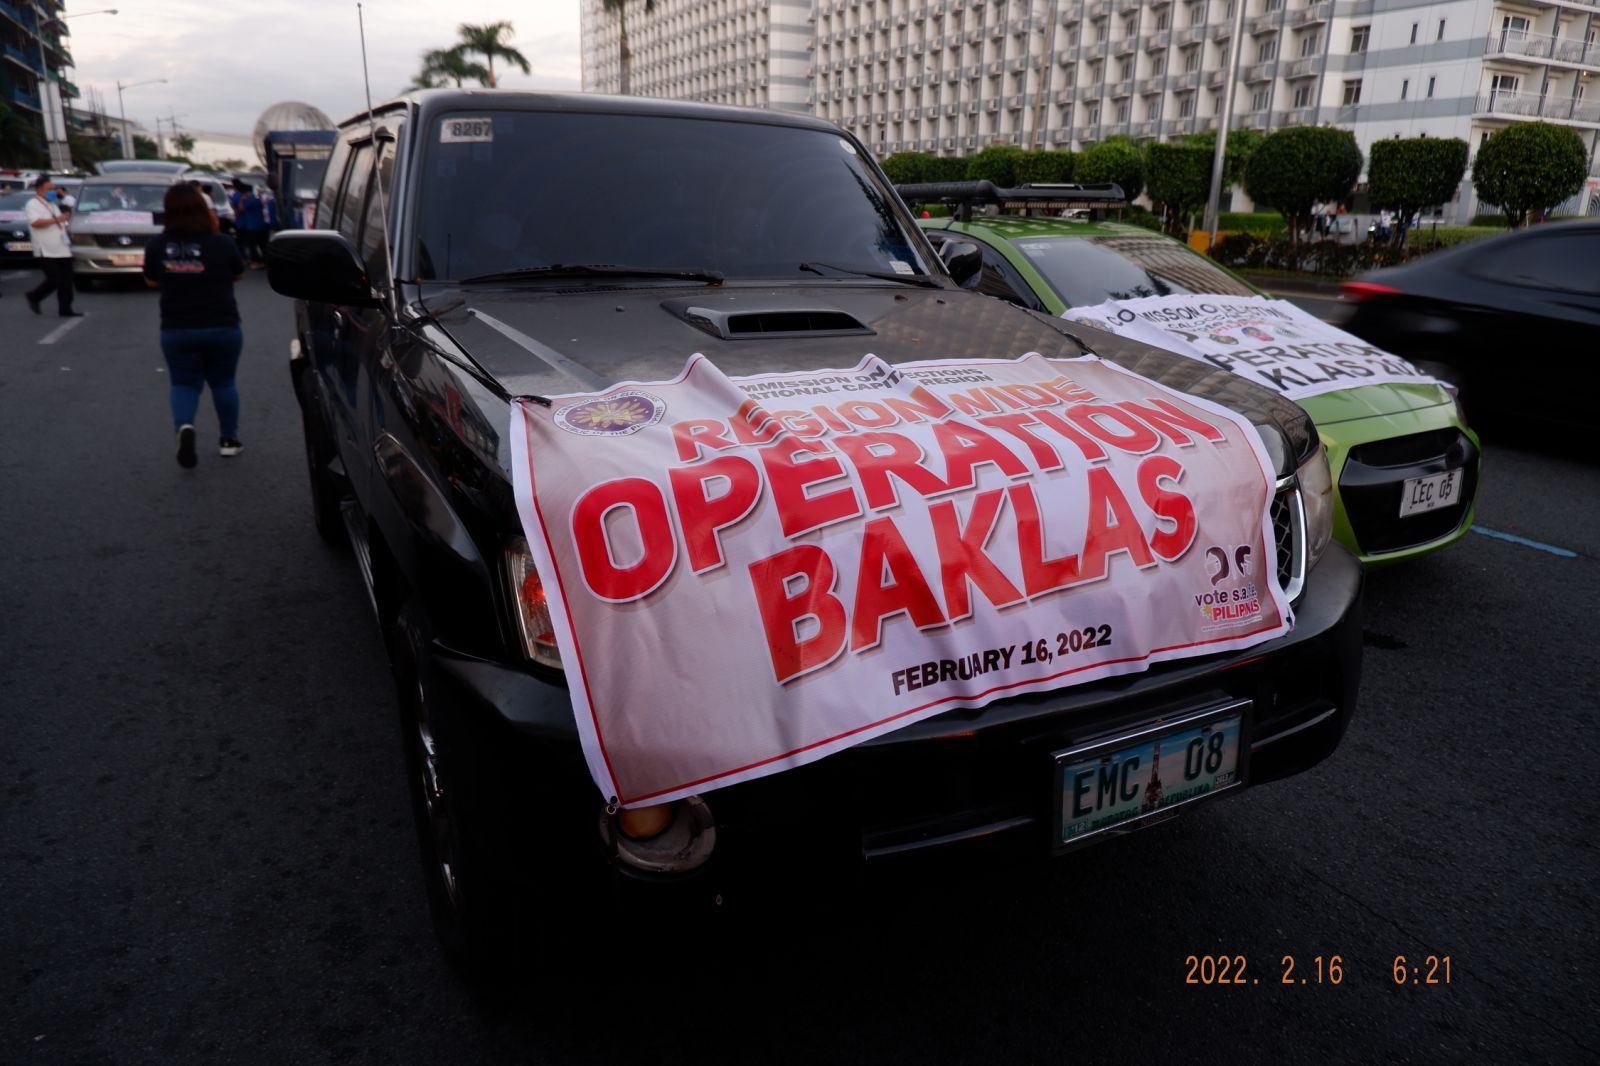 Comelec urged to amend ‘arbitrary’ policy on ‘Oplan Baklas’